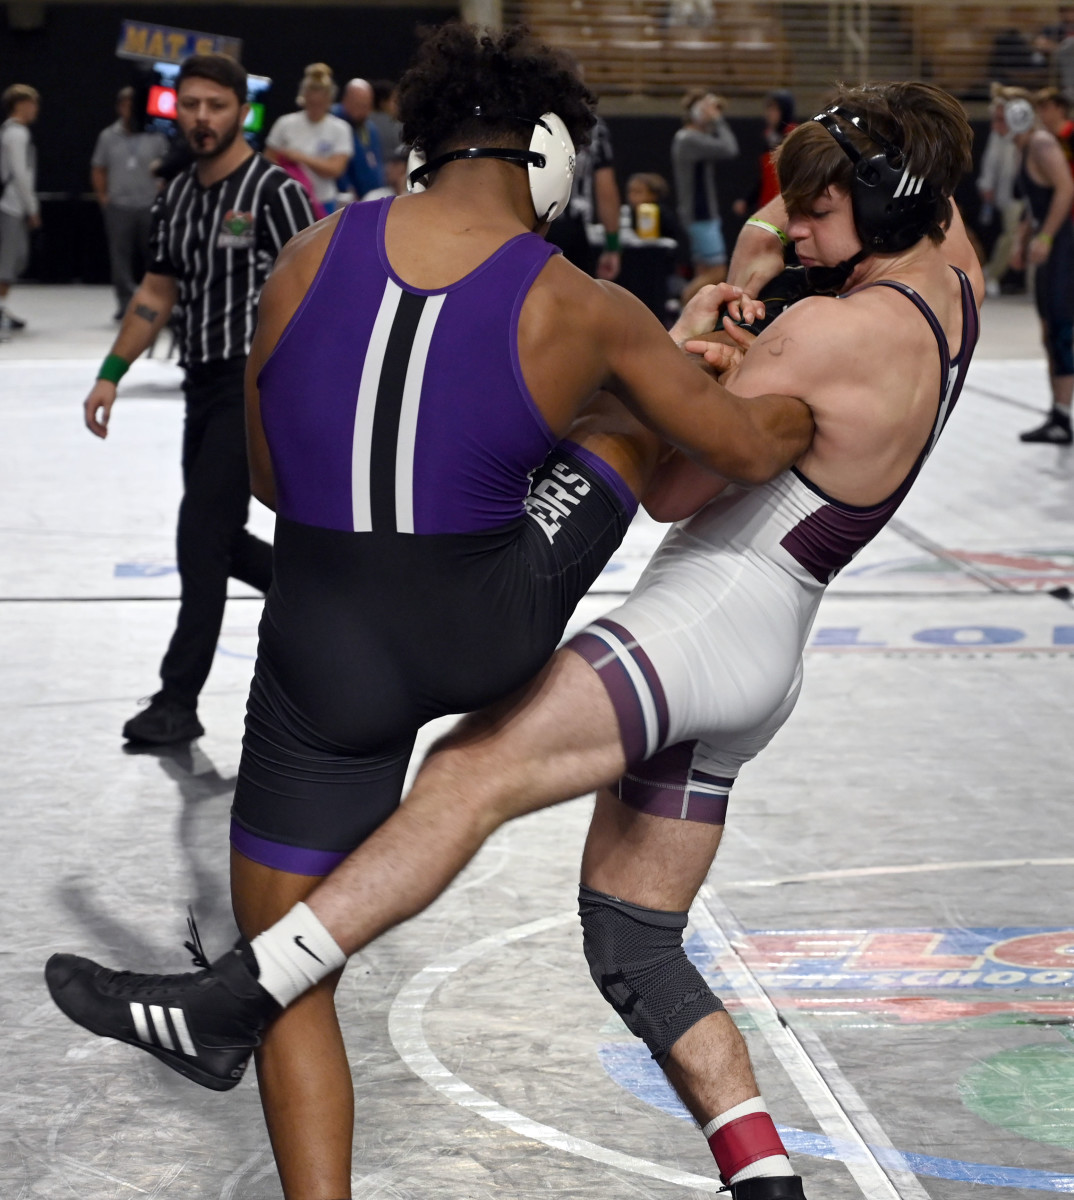 Dominic Bambinelli from Mill Creek gets a win against Elijah Penton from Winter Springs during a 175-pound semifinal match on Saturday at the Knockout Christmas Classic at Silver Spurs Arena in Kissimmee. 